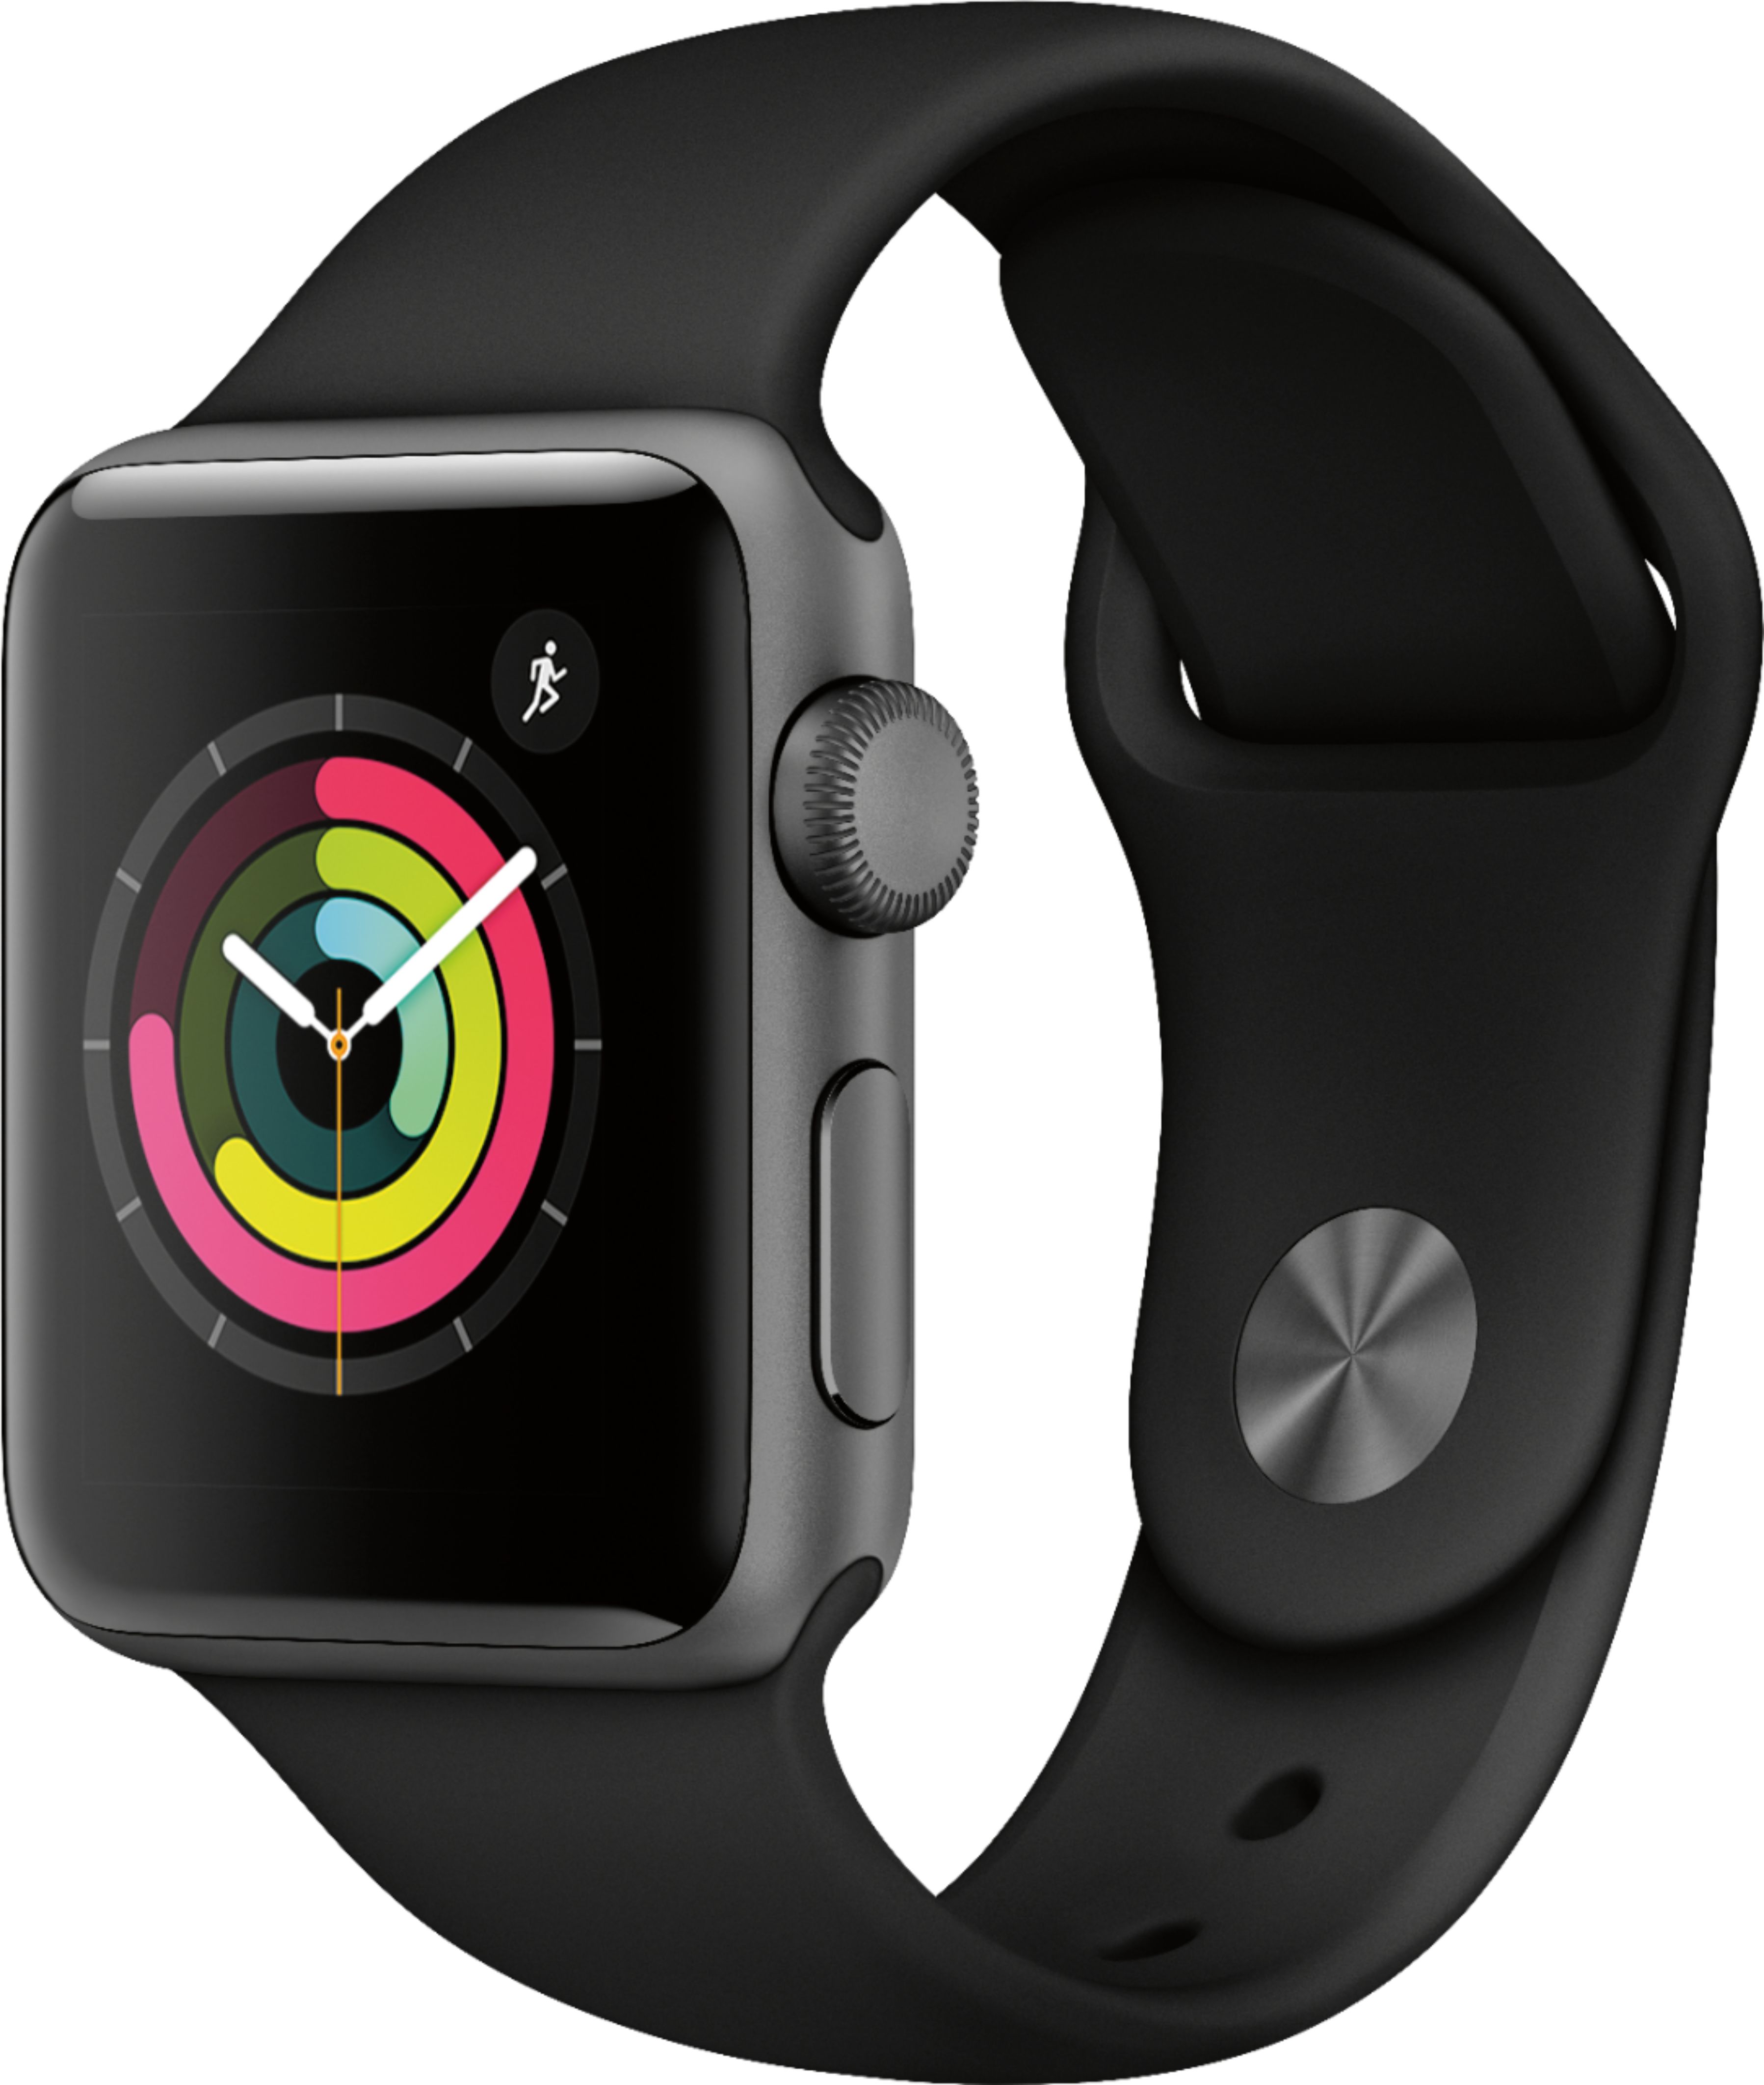 GSRF Apple Watch Series 3 (GPS) 38mm Space Gray Aluminum Case with Black Sport Band - Space Gray Aluminum